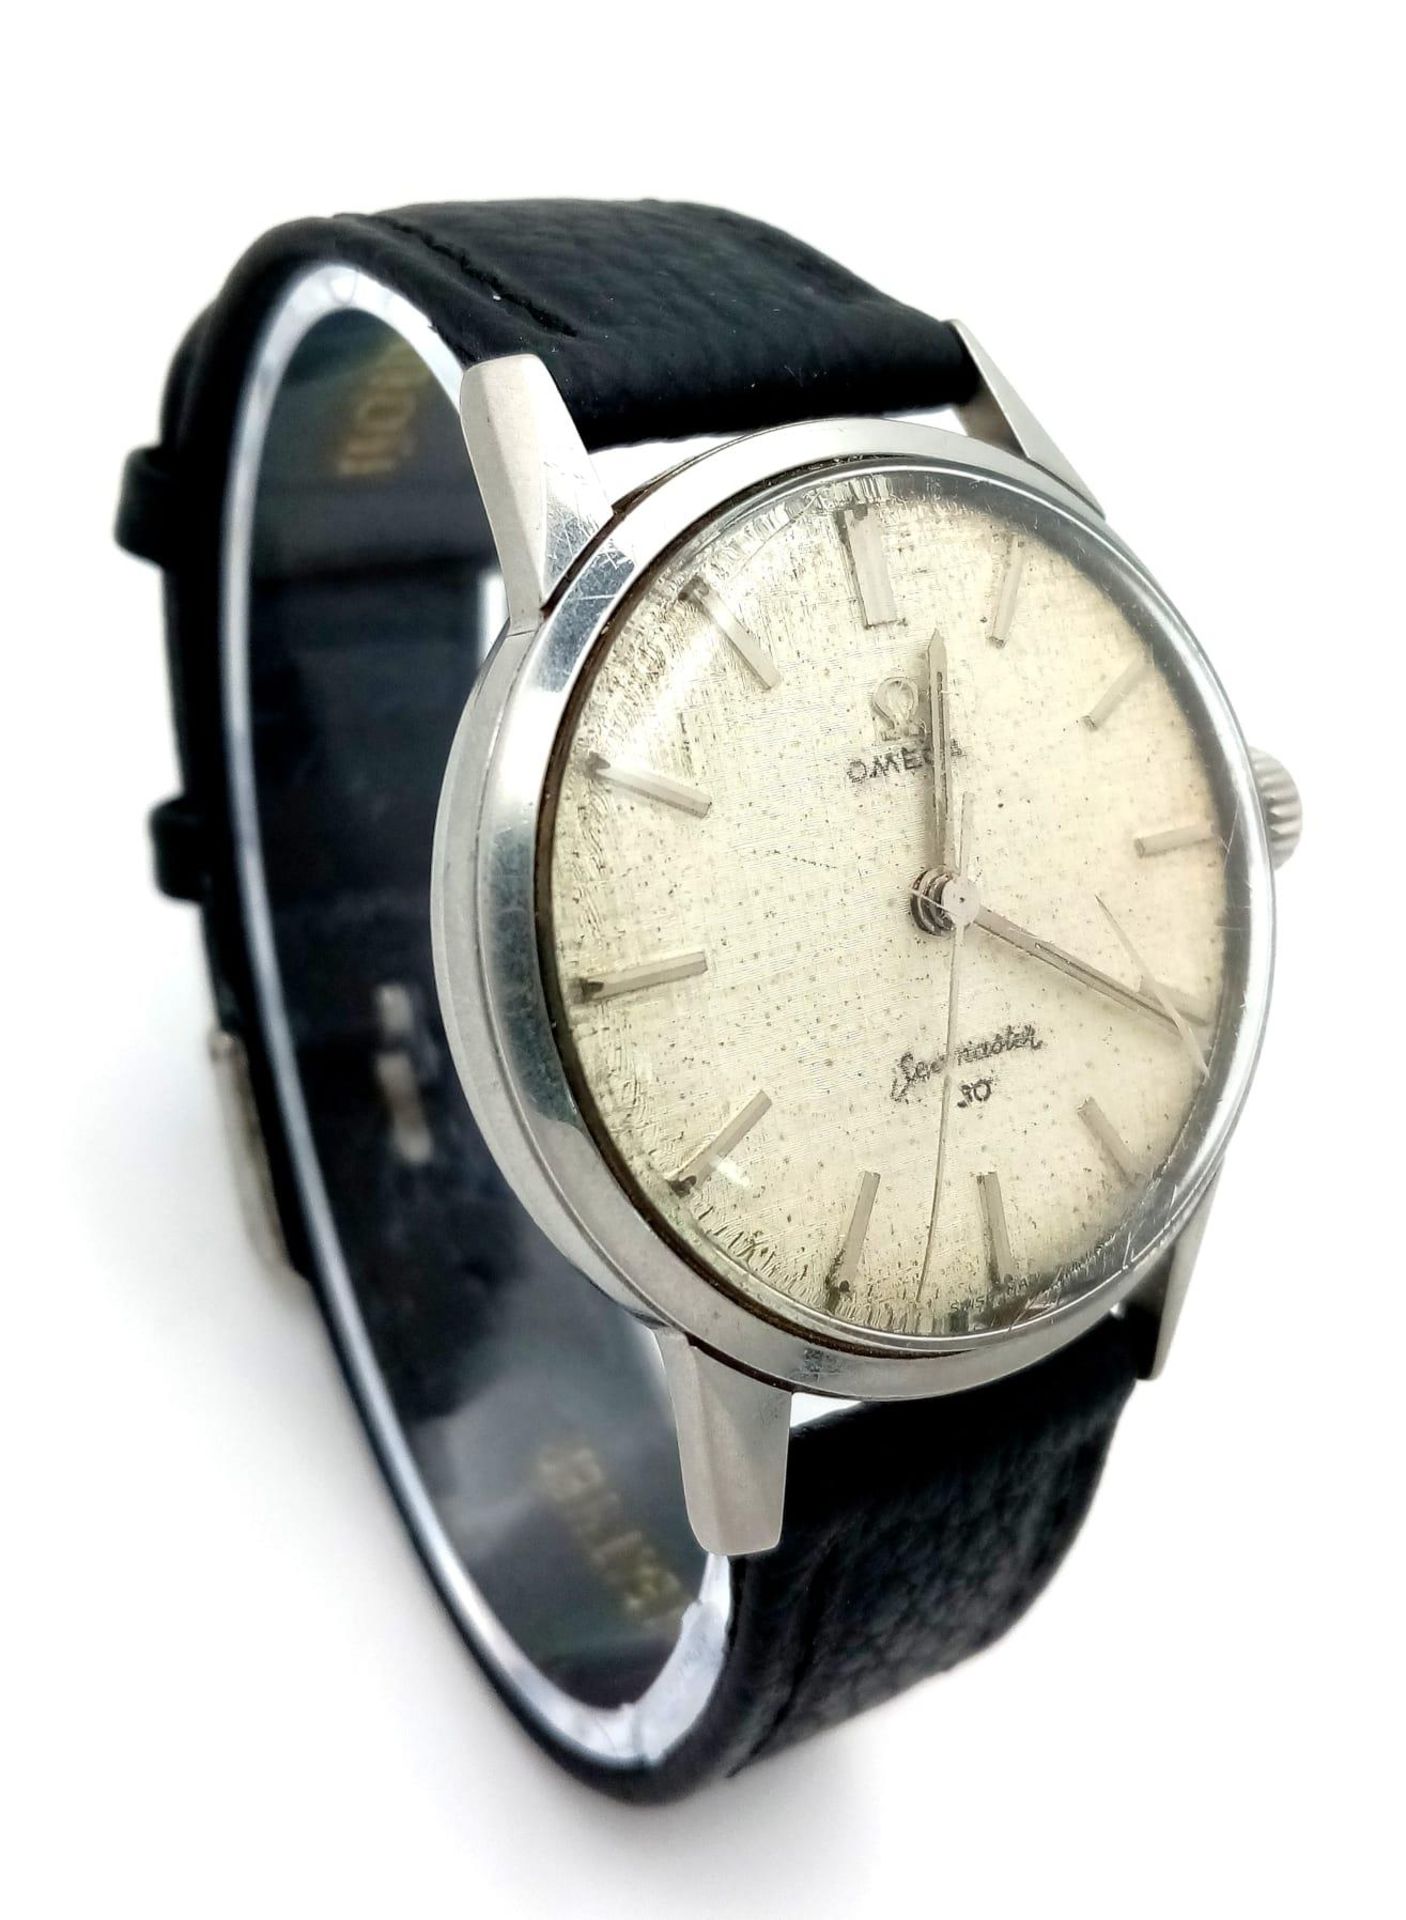 A Classic Omega Seamaster 30 Vintage 1960s Gents Watch. Black leather strap. Stainless steel case - - Image 2 of 7